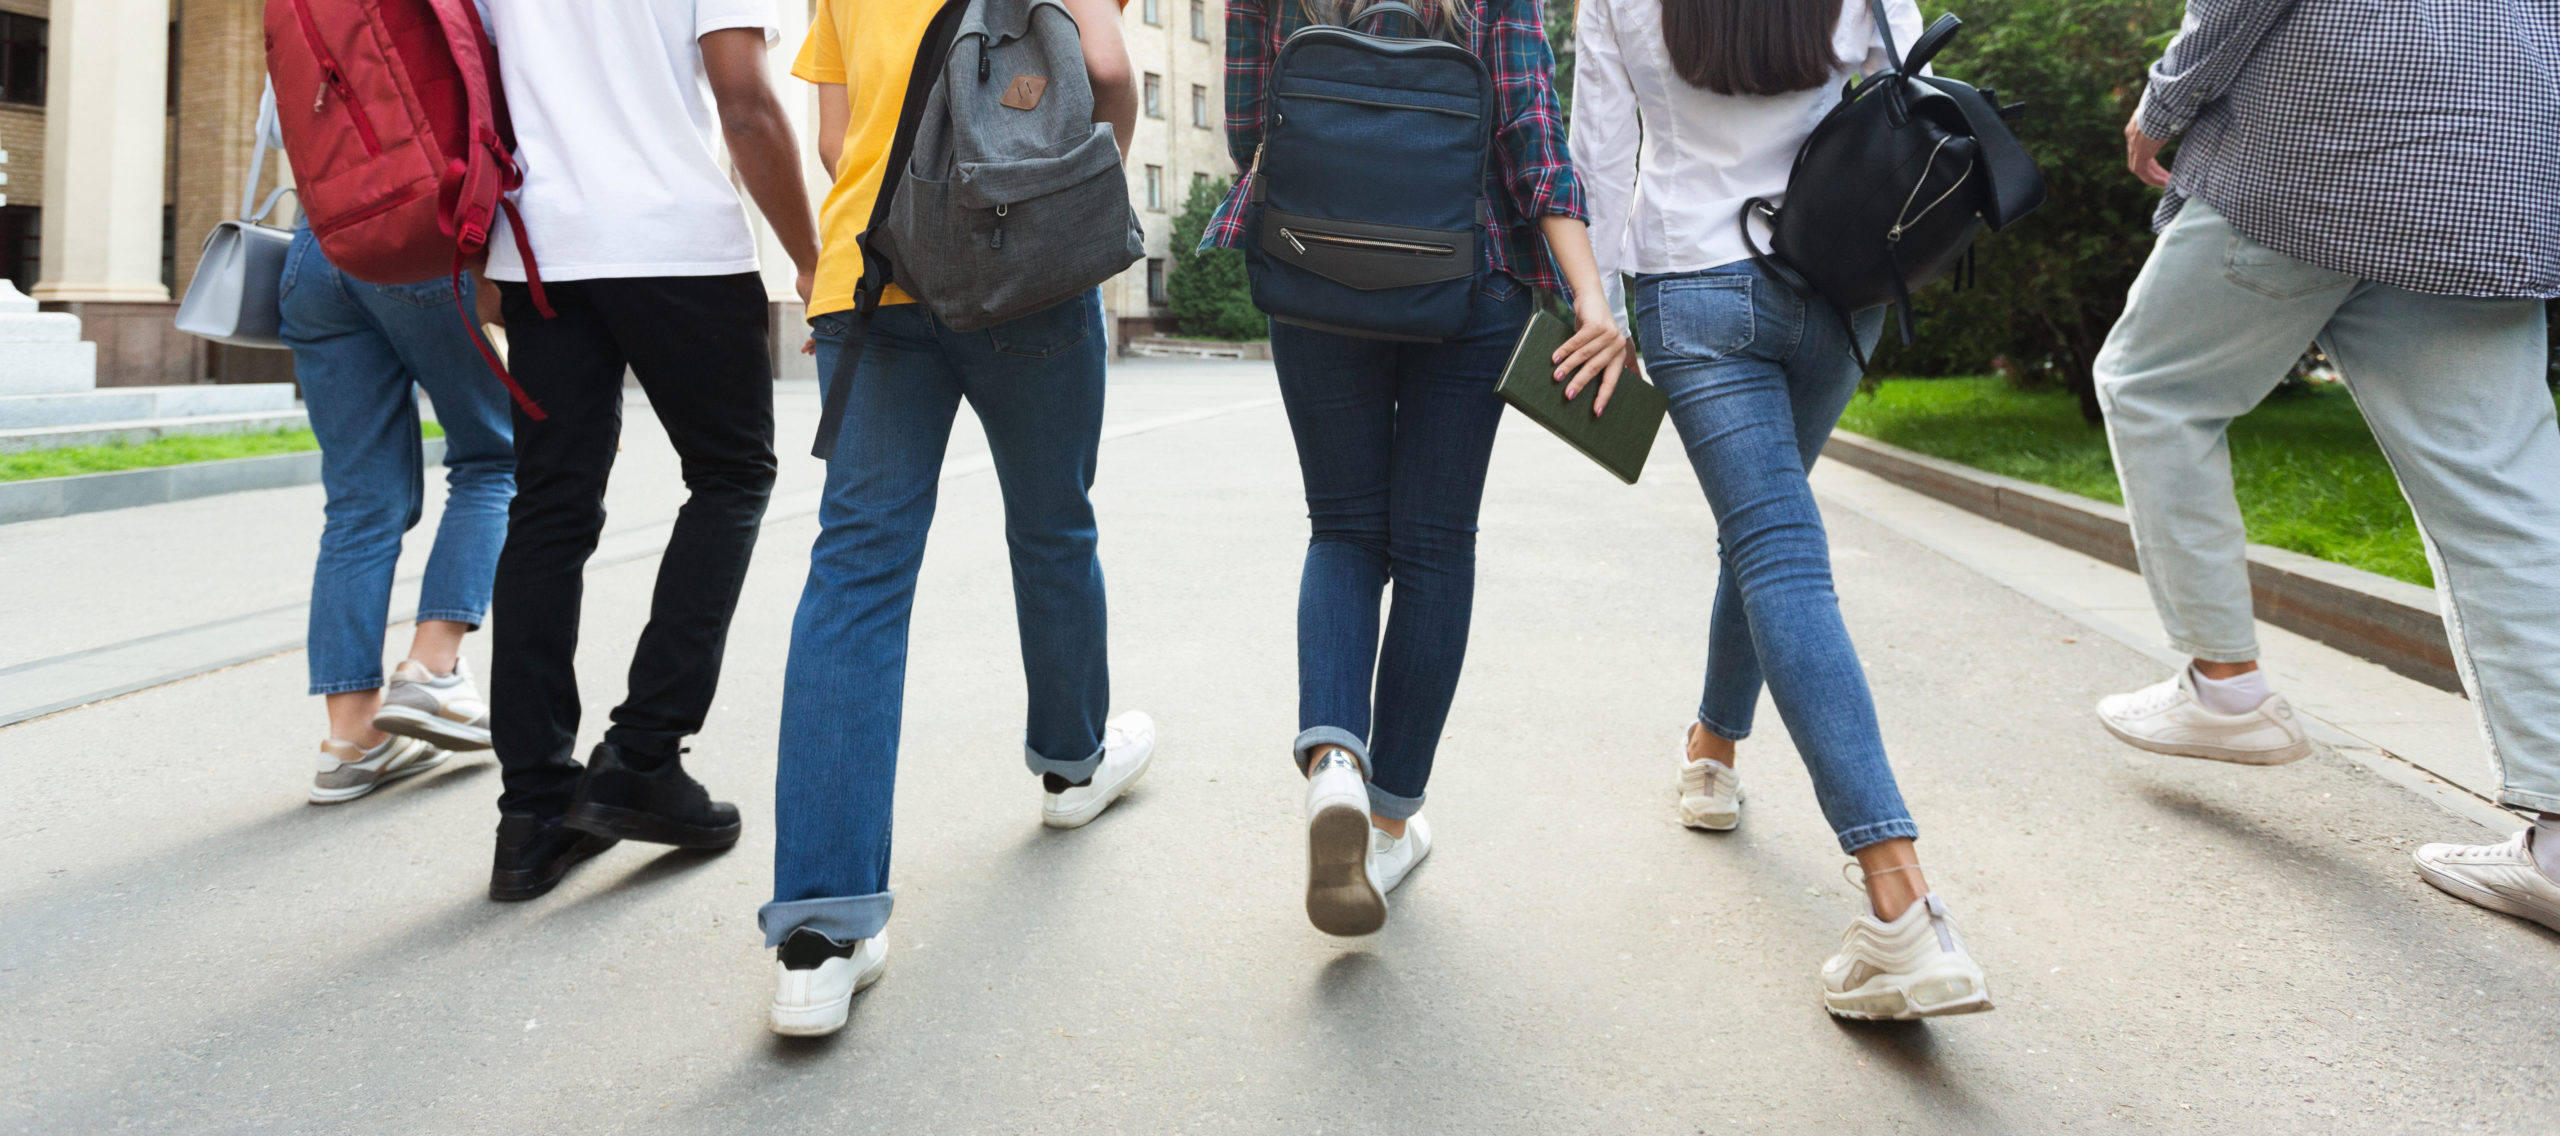 Teens going back to school, walking together on campus.